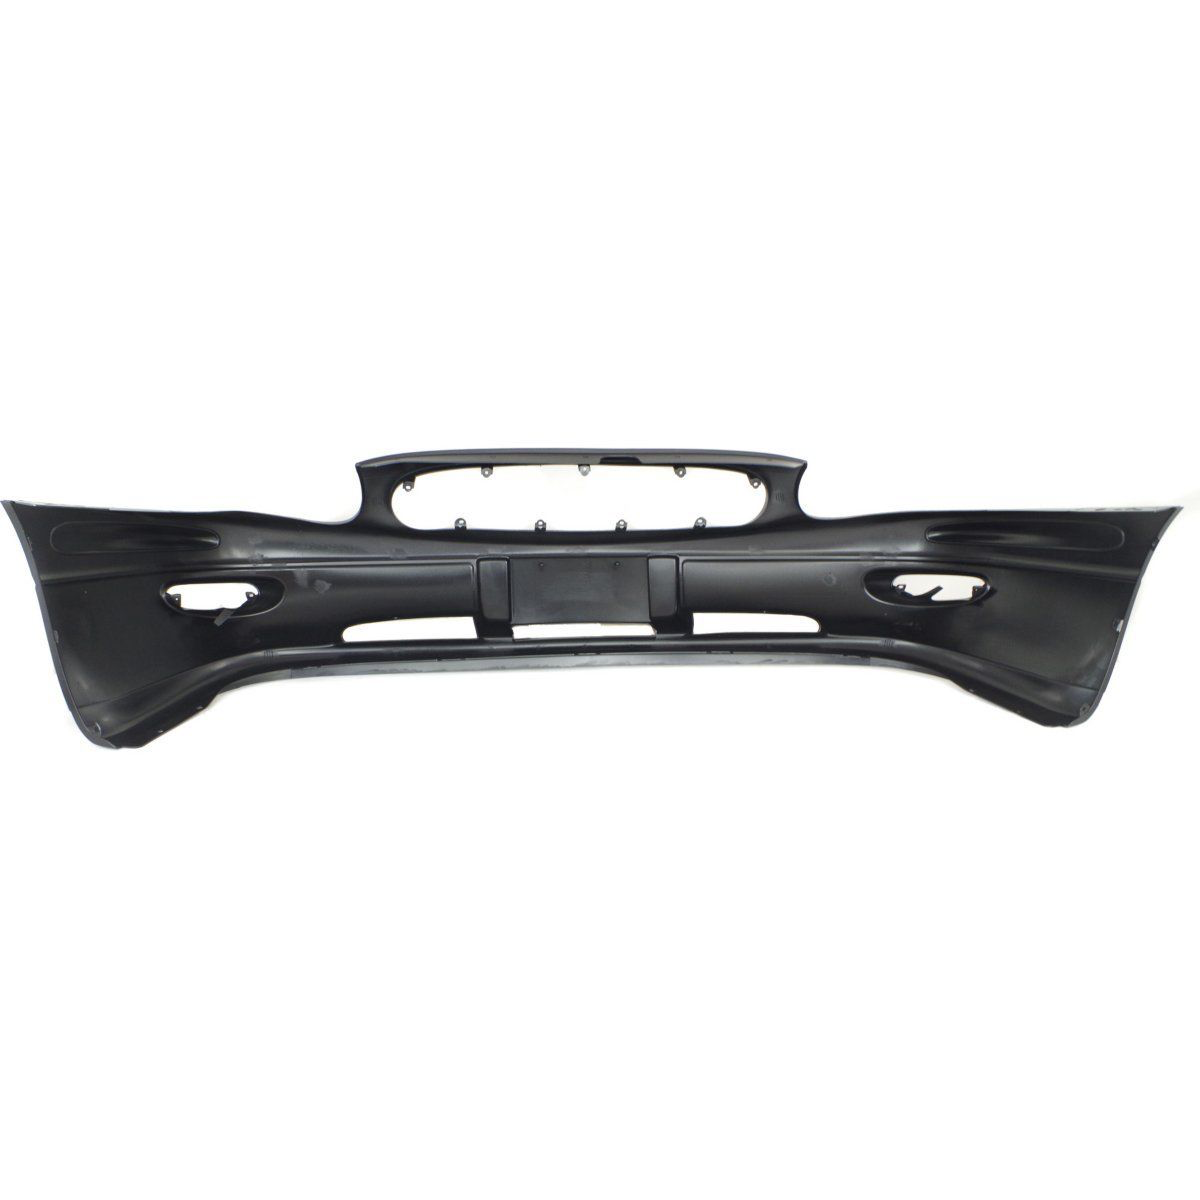 2000-2005 BUICK LESABRE Front Bumper Cover Custom  Lower  smooth finish Painted to Match